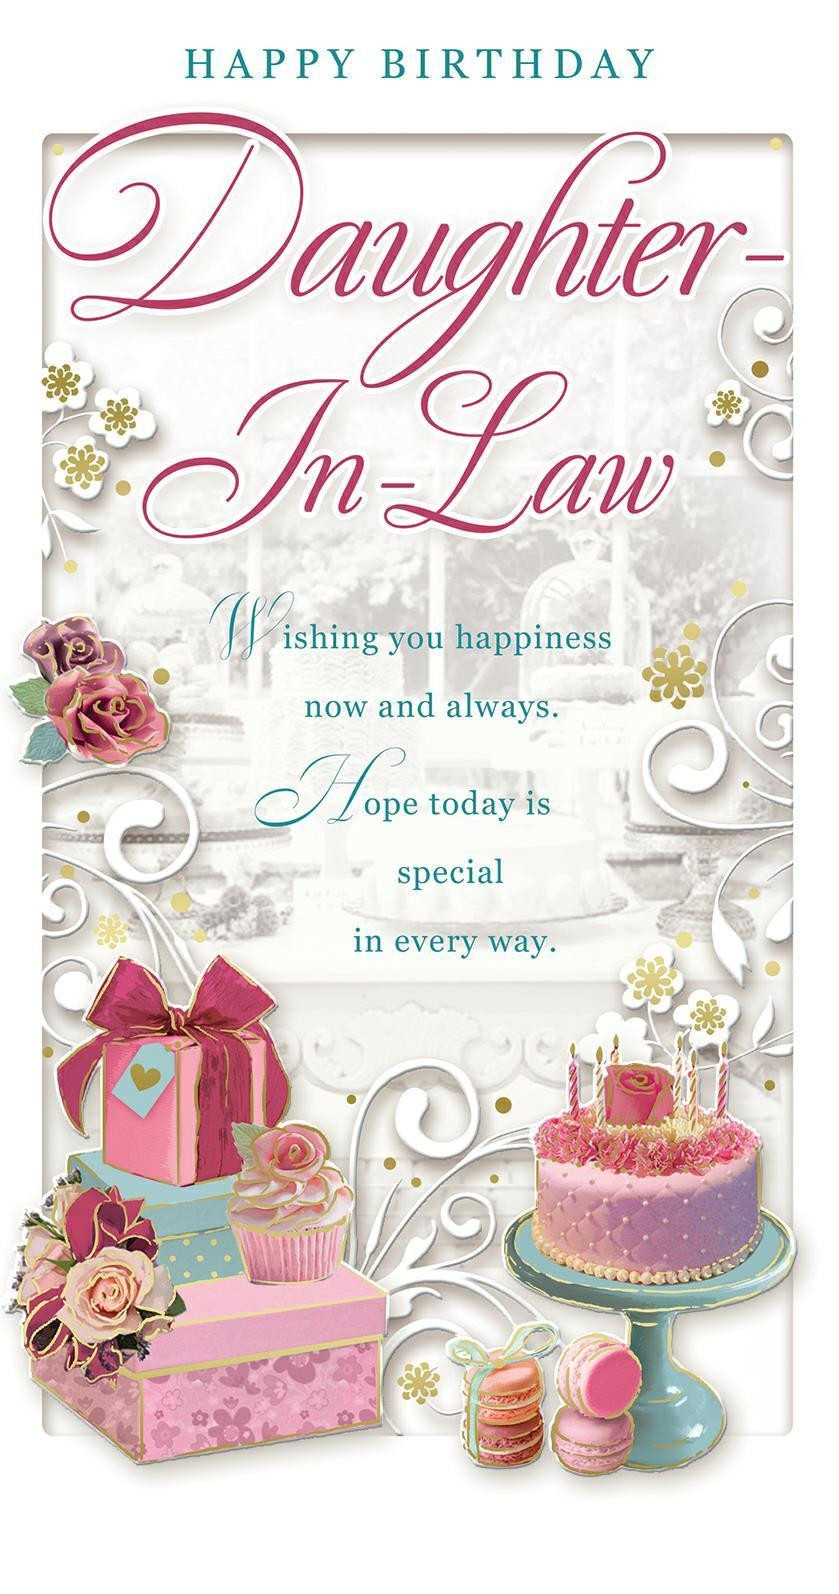 Birthday Wishes For Daughter In Law
 HAPPY BIRTHDAY DAUGHTER IN LAW CARD CUPCAKE ROSES GIFTS